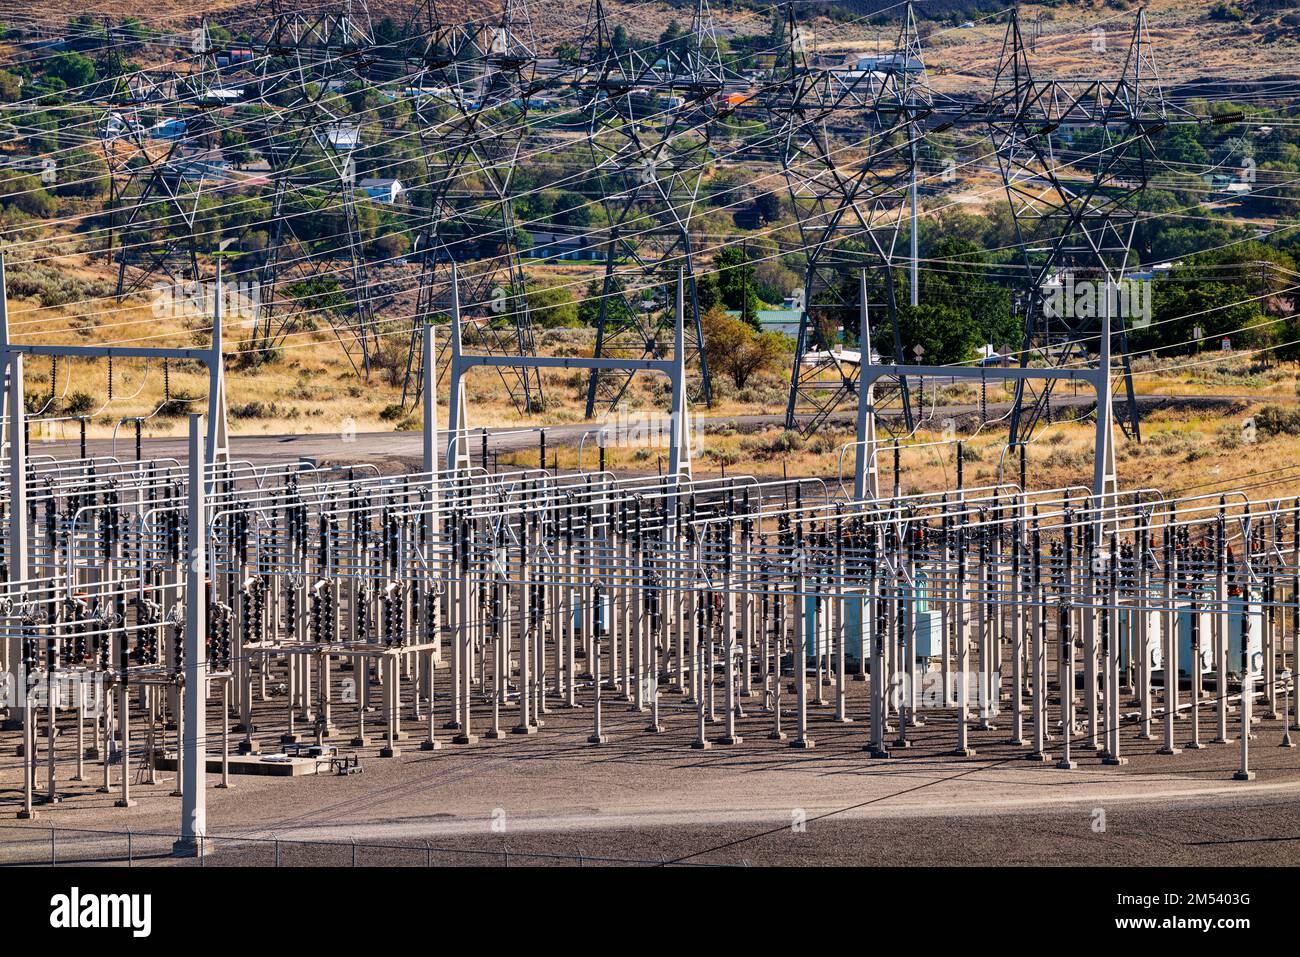 Electrical transmission field; Grand Coulee hydroelectric dam; largest producer of power in the USA; Columbia River; Washington state; USA Stock Photo